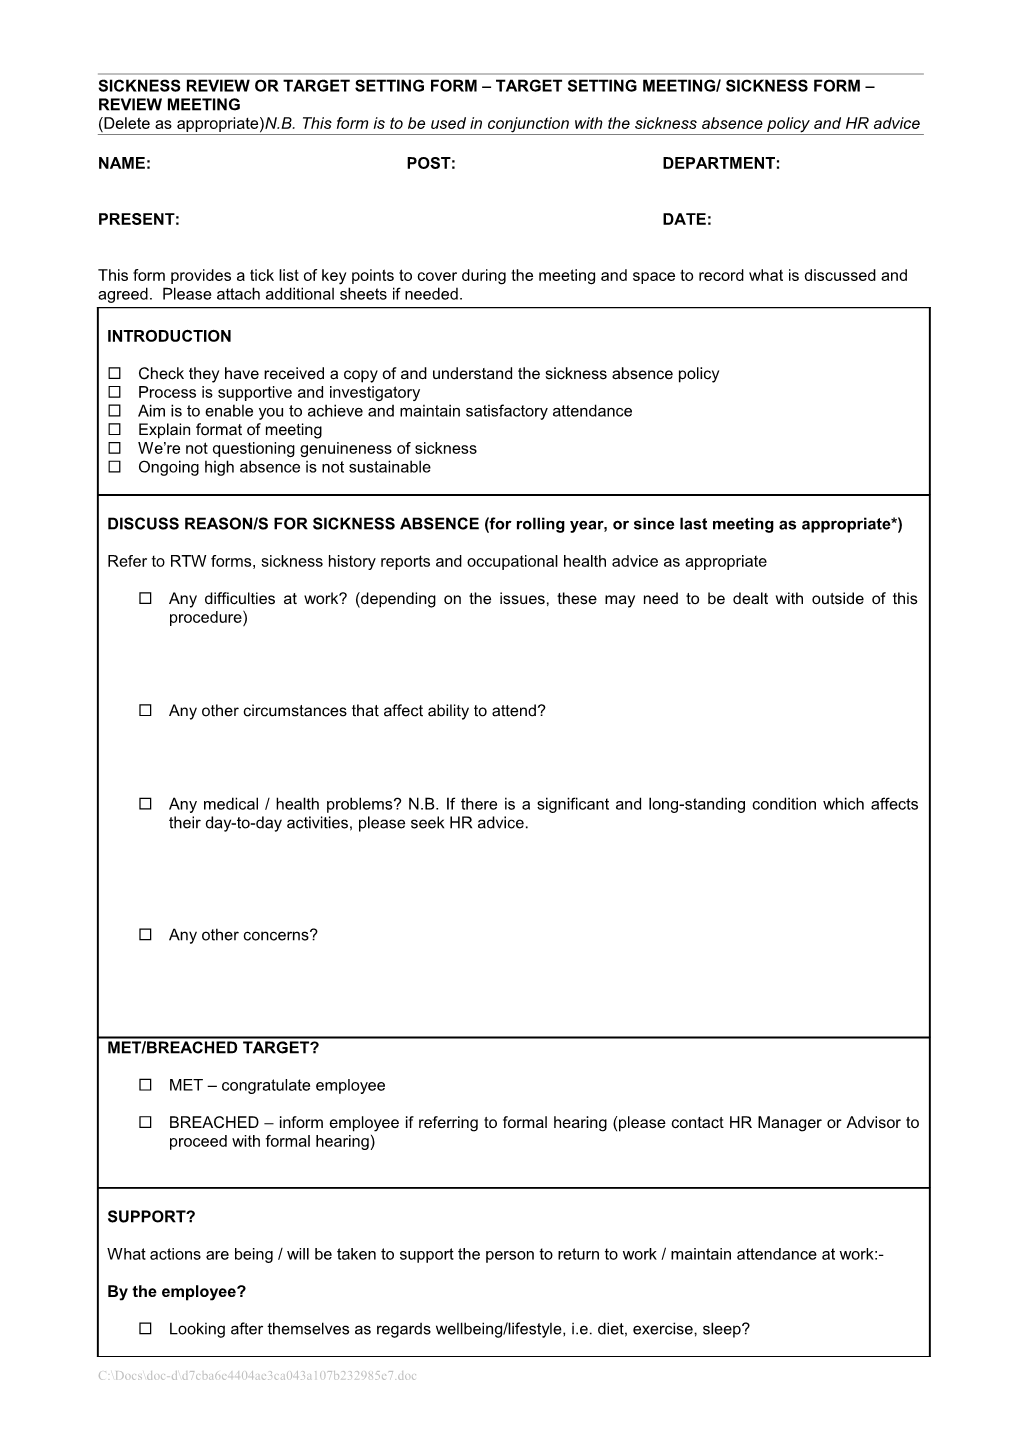 Sickness Form Target Setting / Sickness Form - Review